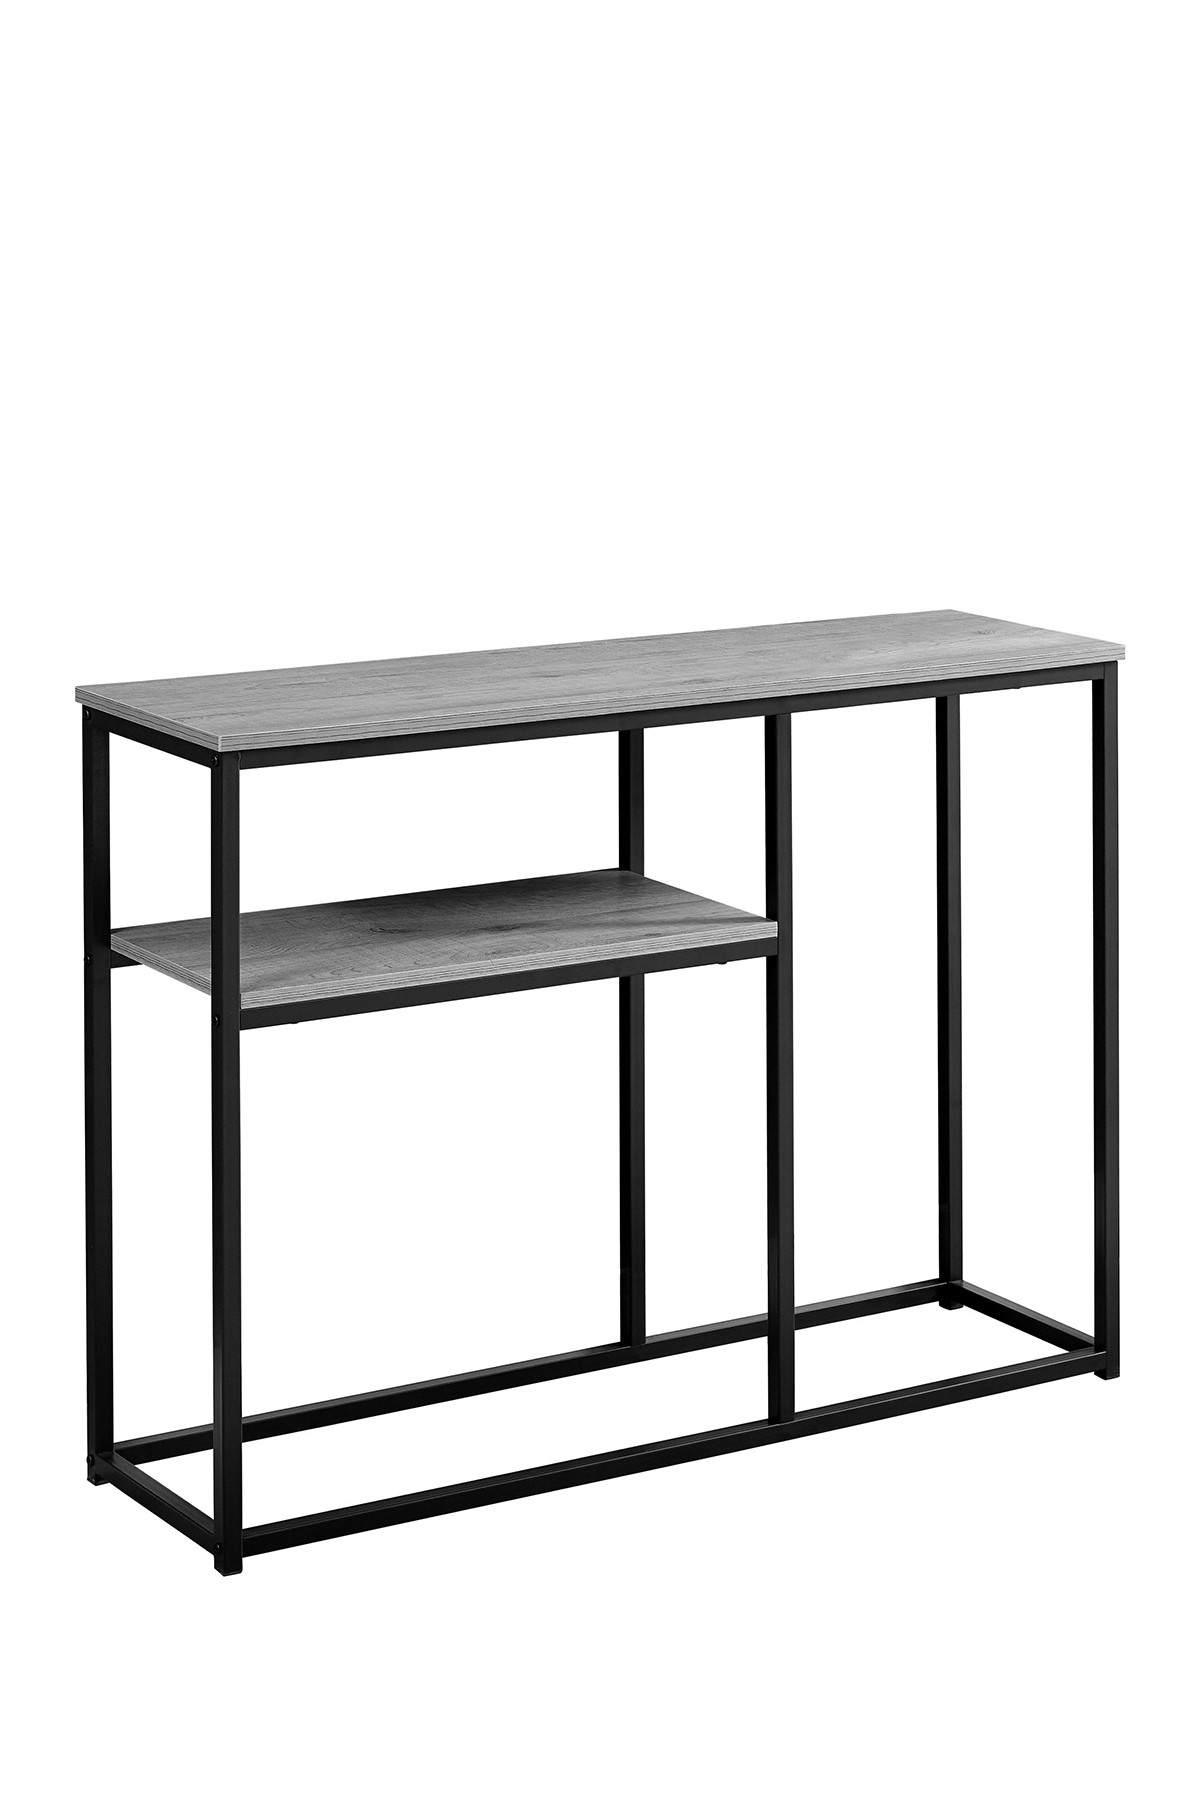 monarch specialties grey hall console accent table nordstrom rack teak wood dining silver decor lighting websites drop leaf set threshold trim ikea white top pottery barn like